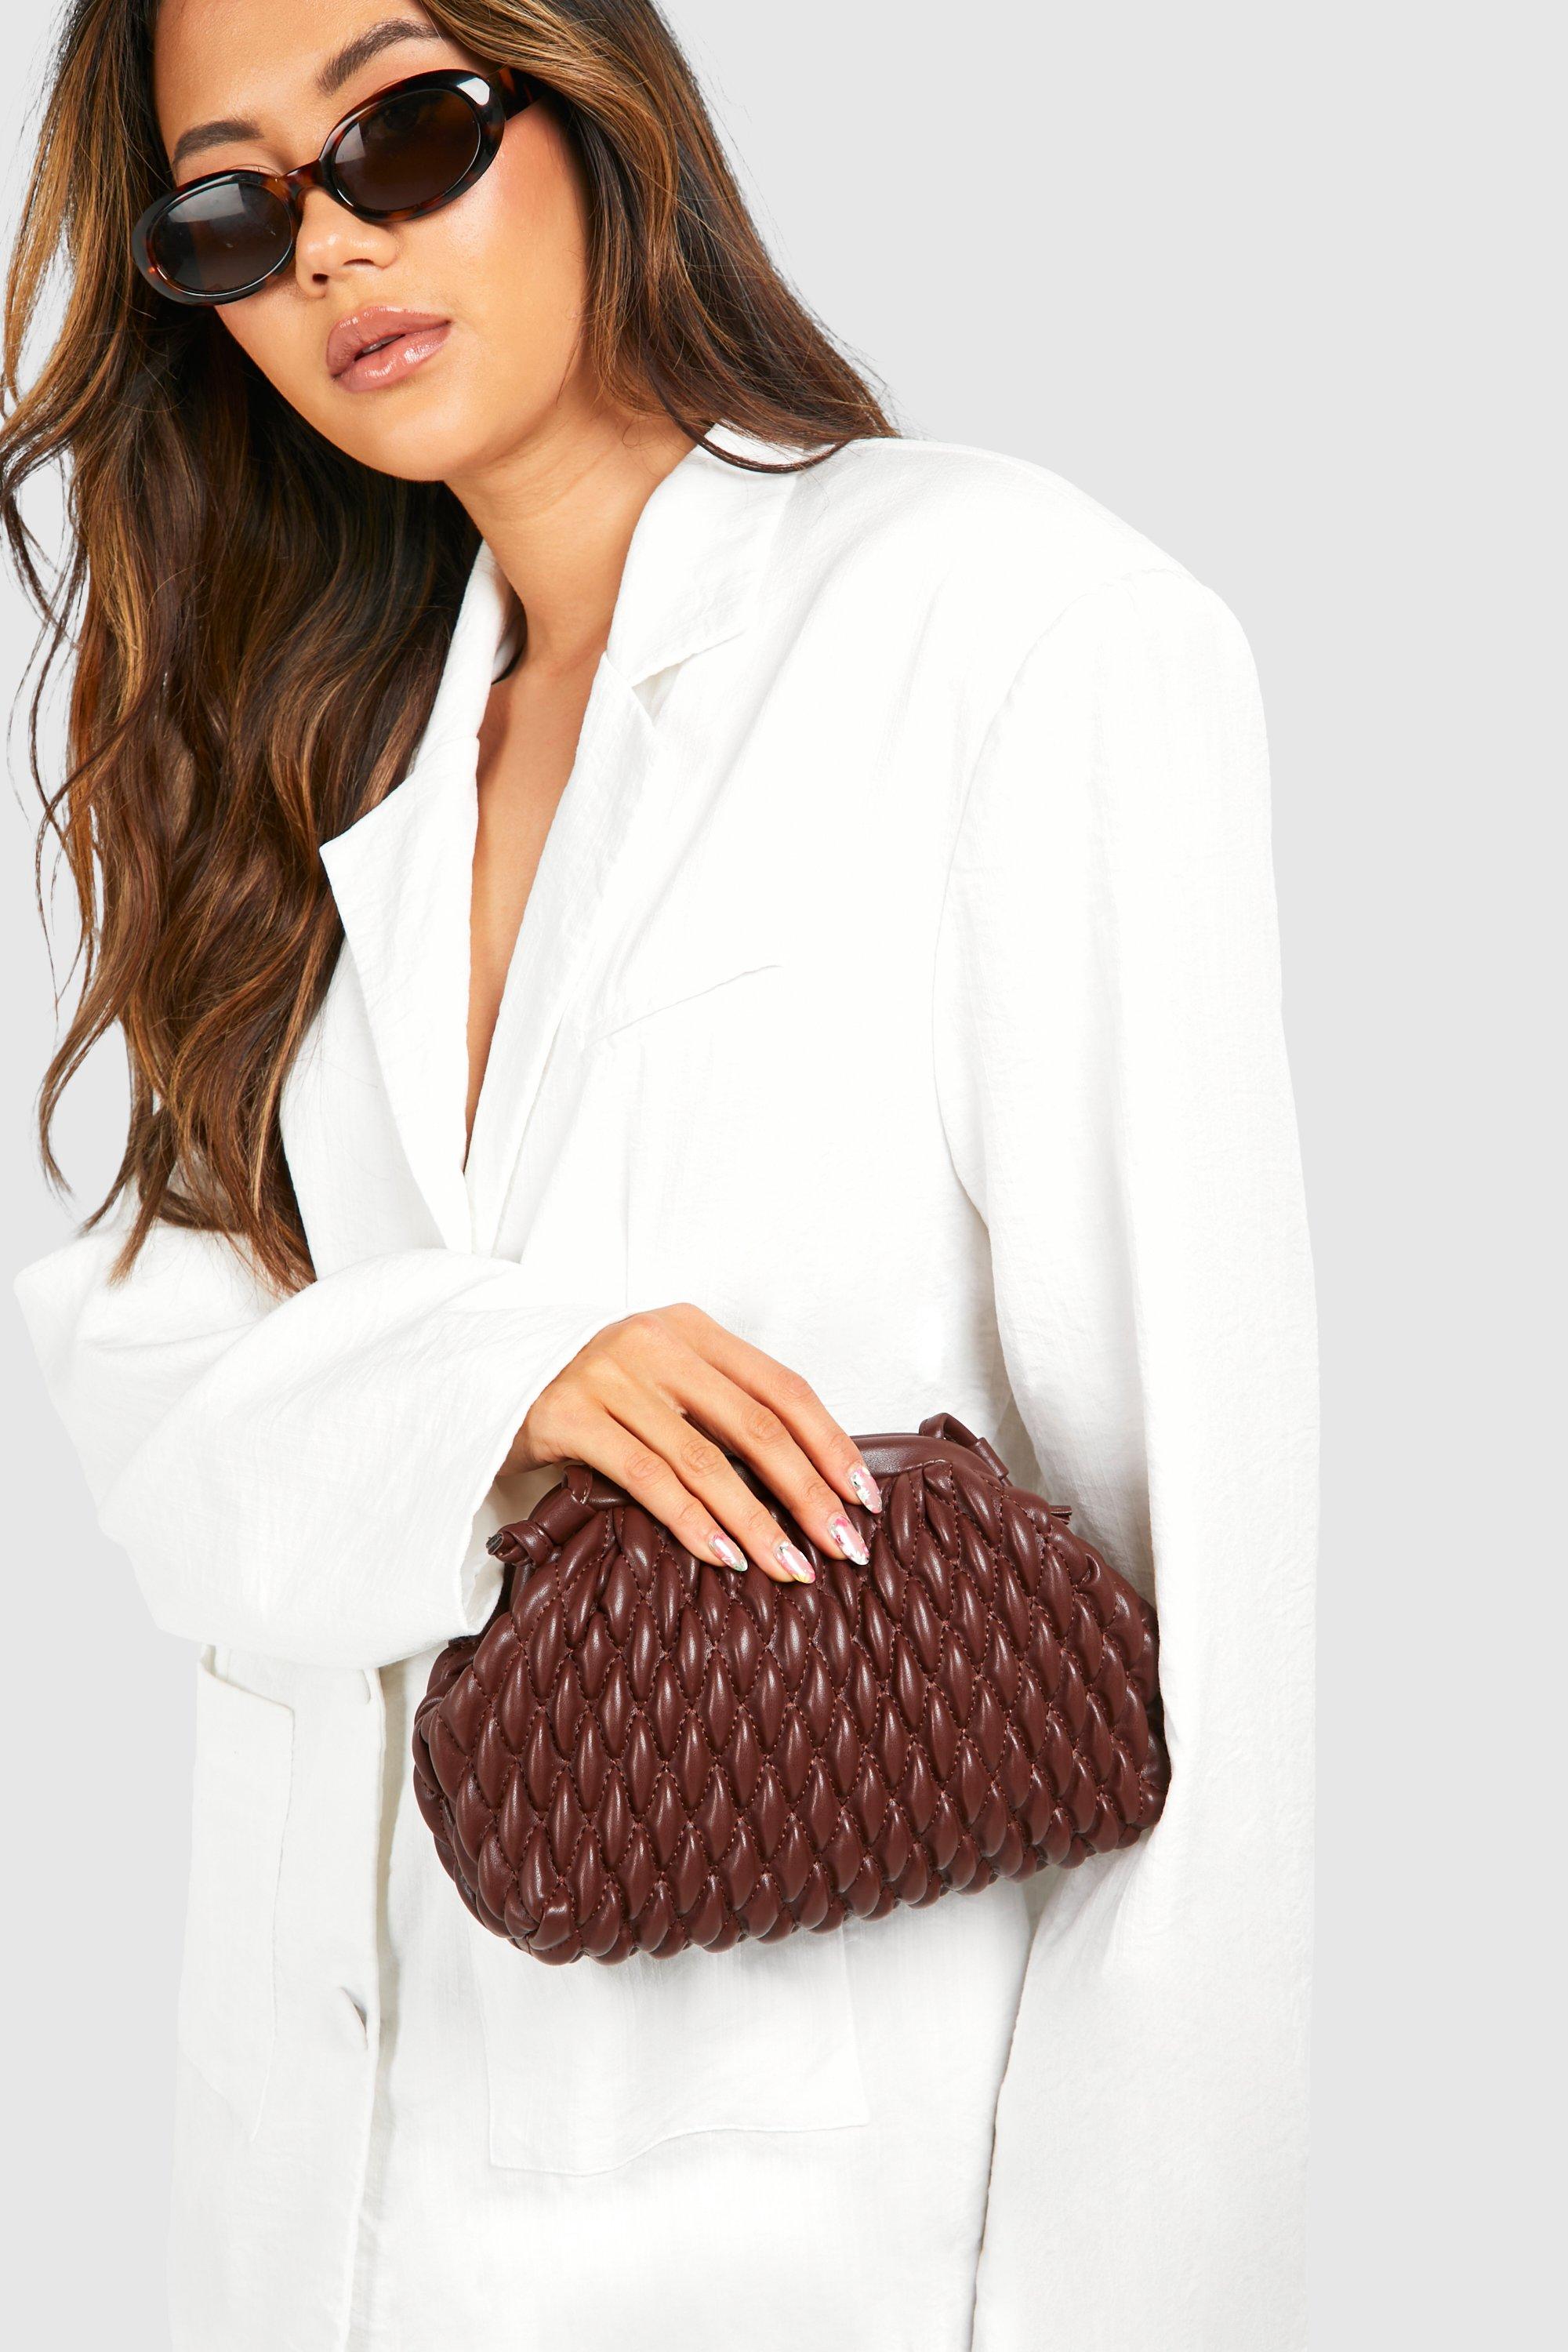 Image of Woven Clutch Bag, Brown